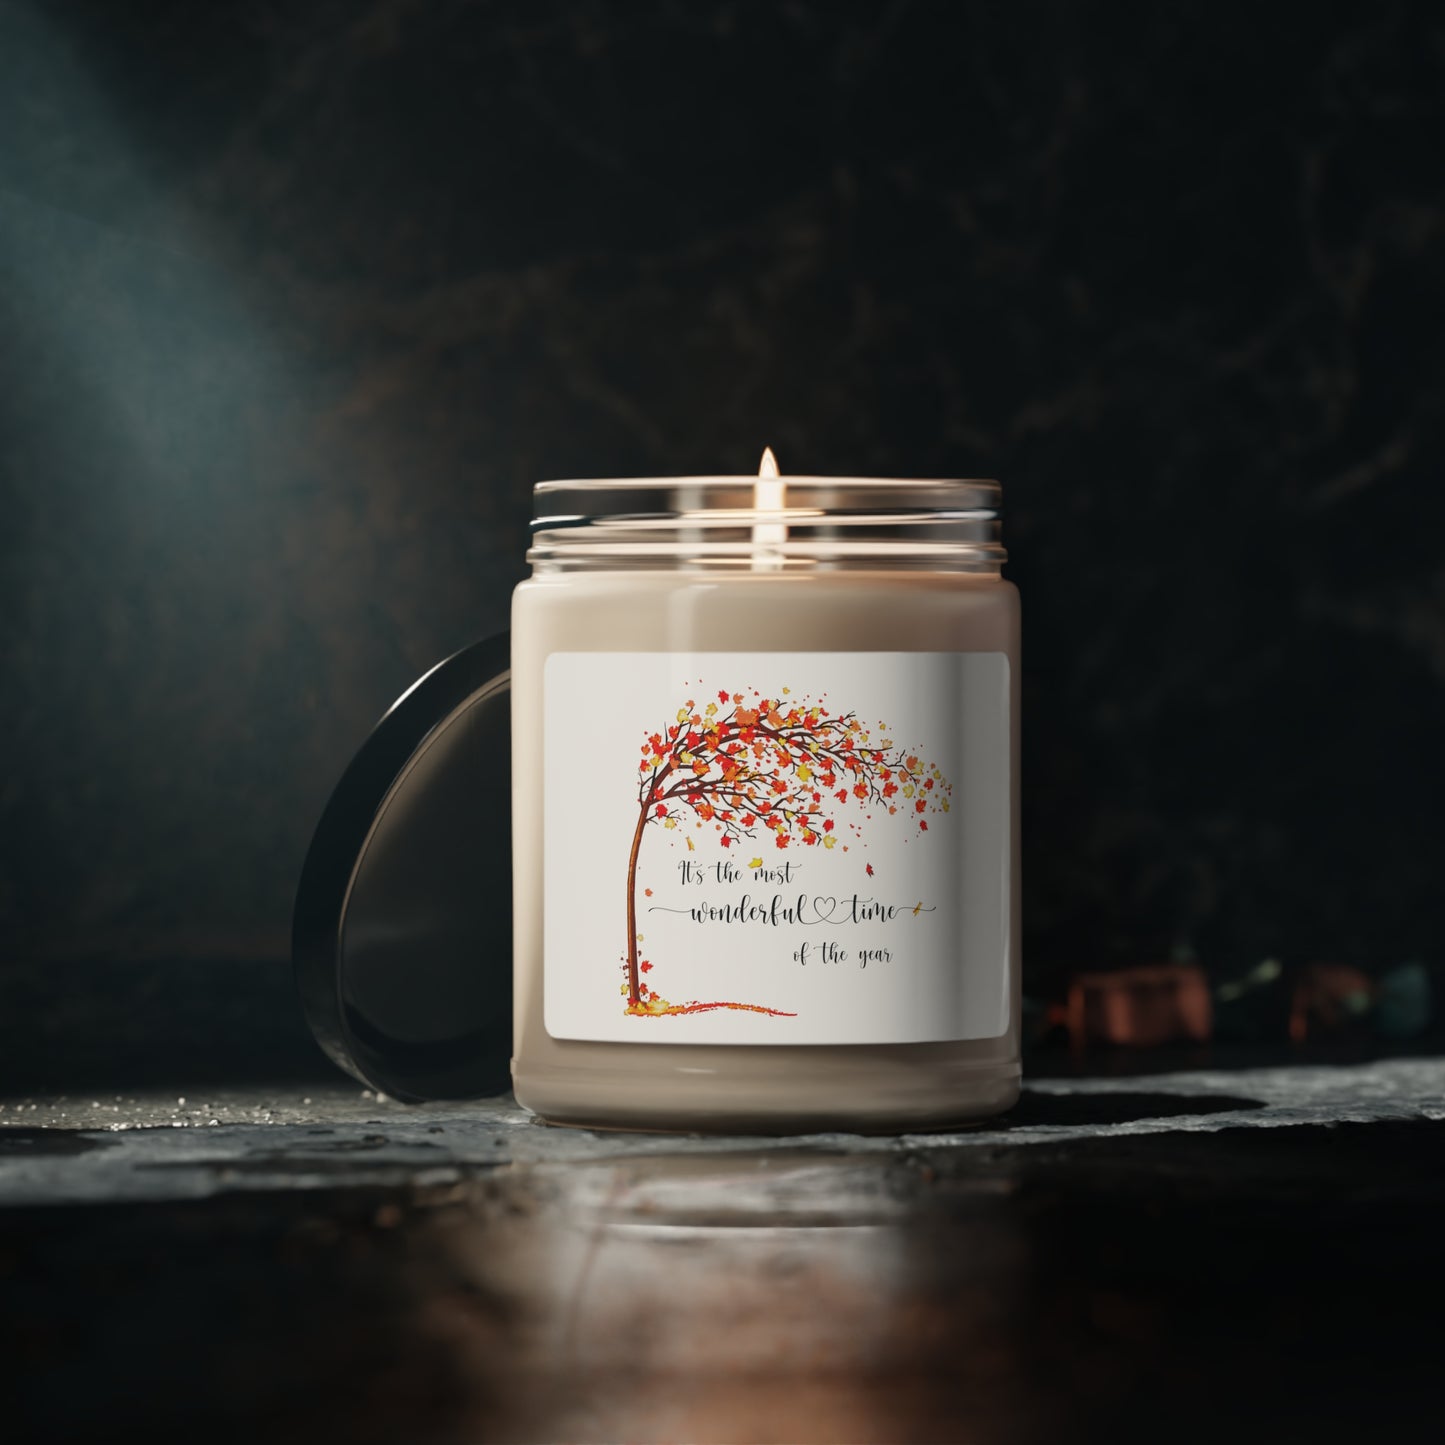 Scented Soy Candle, 9oz - Most Wonderful Time